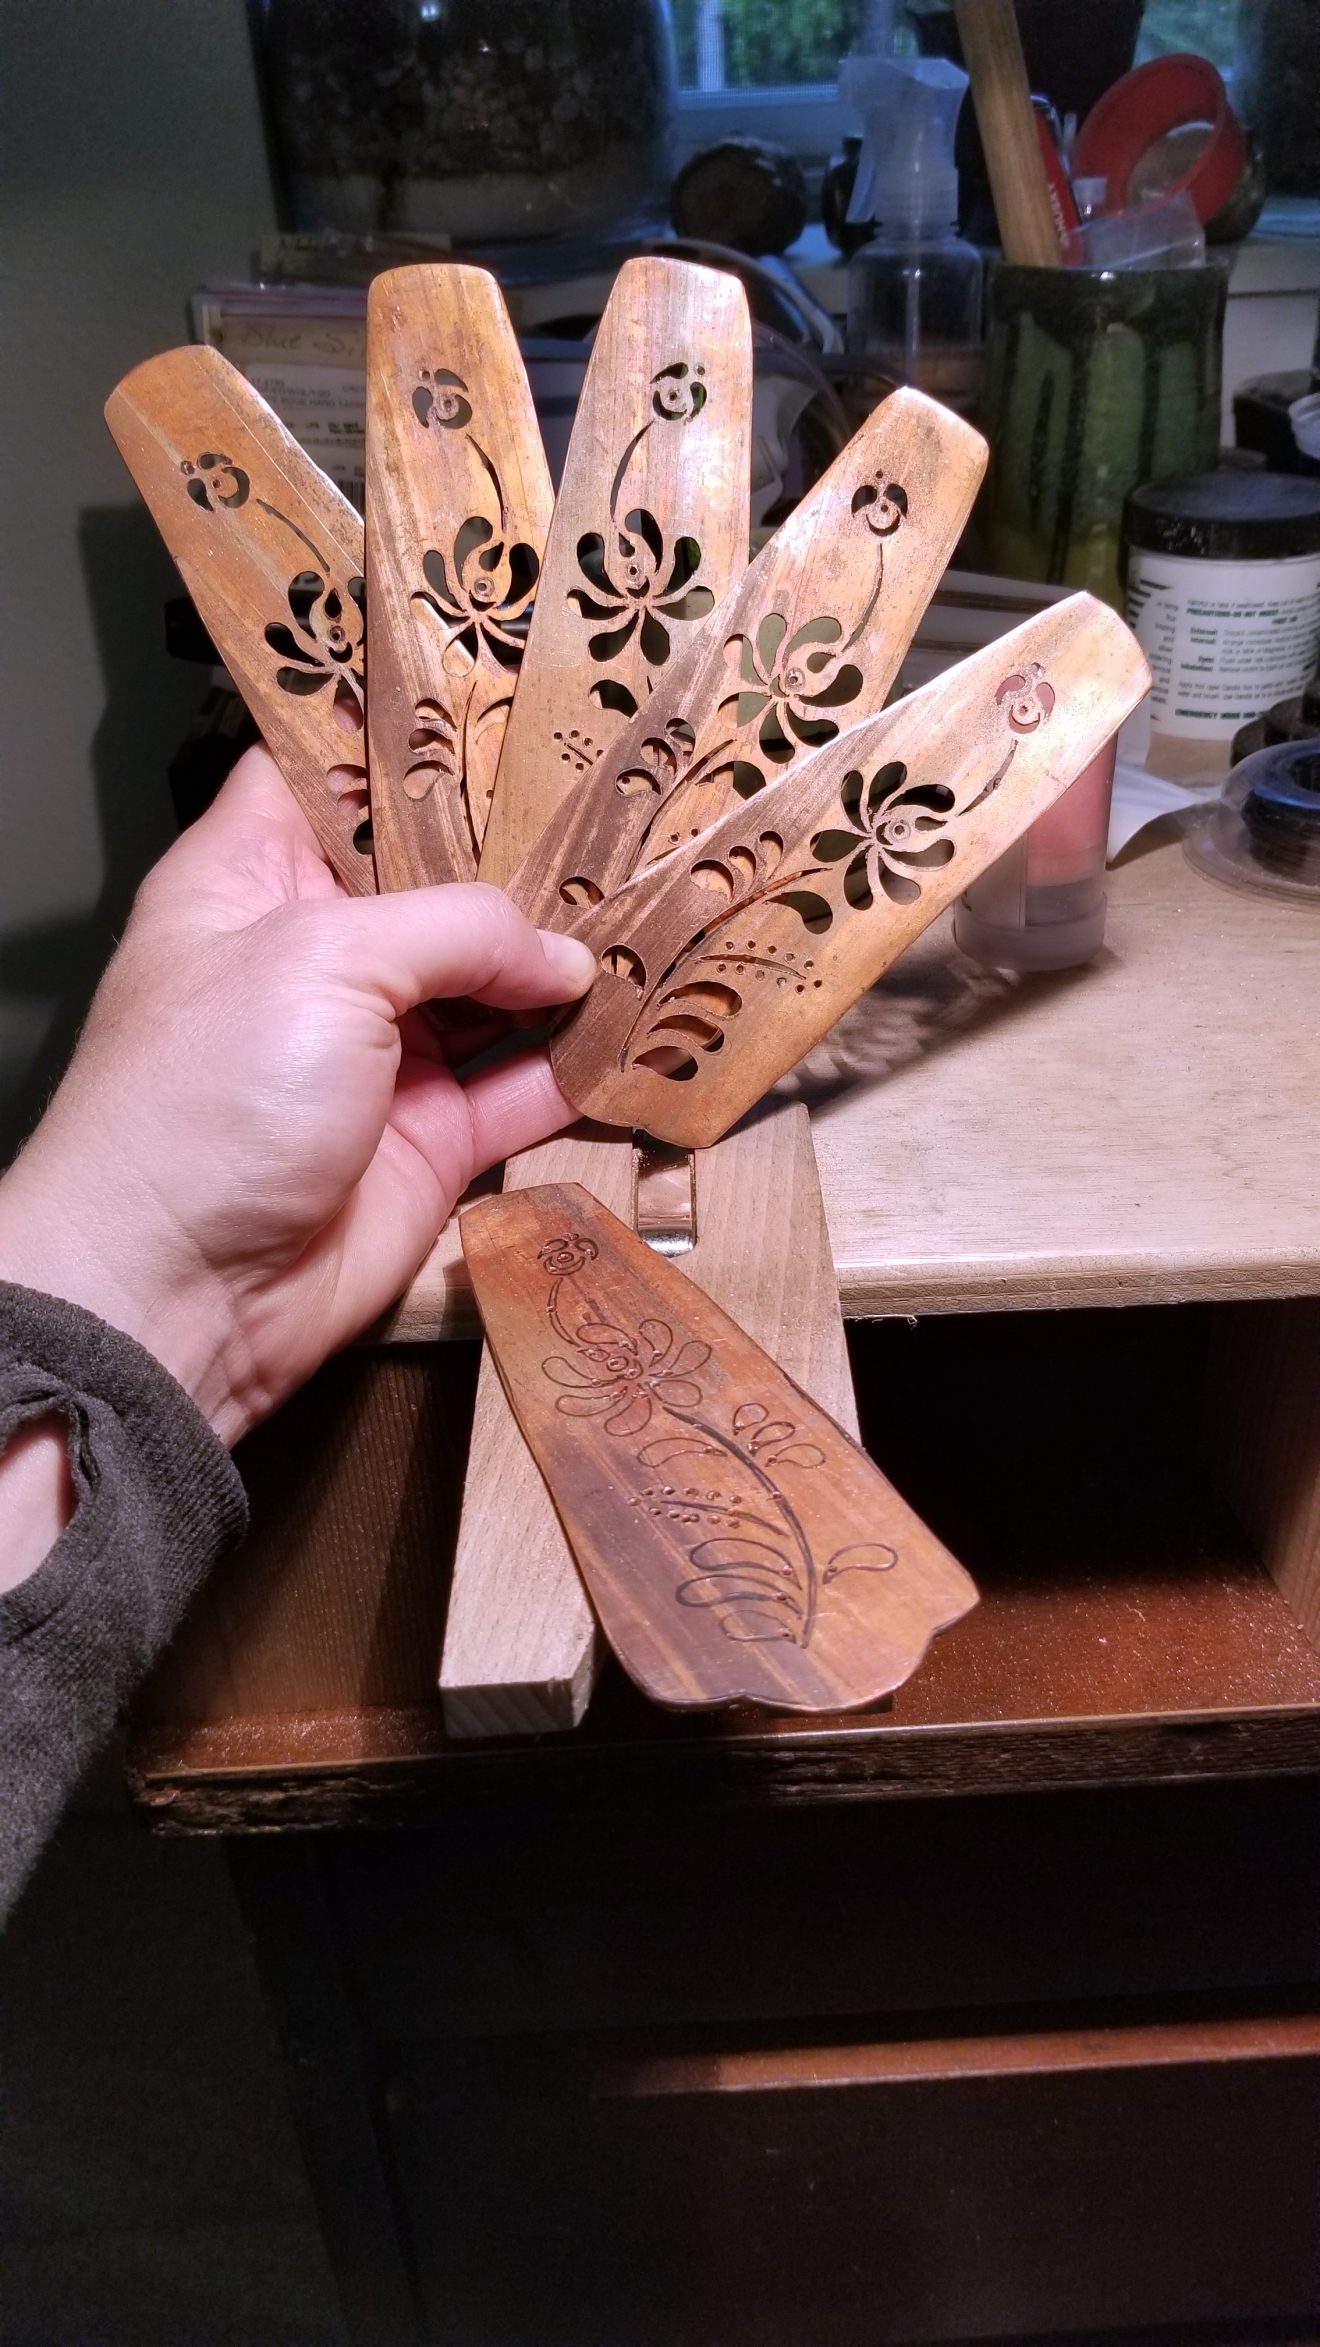 Christen Bouffard displays in-progress copper cake servers that she is making for her metalworking business. Christen Bouffard photo